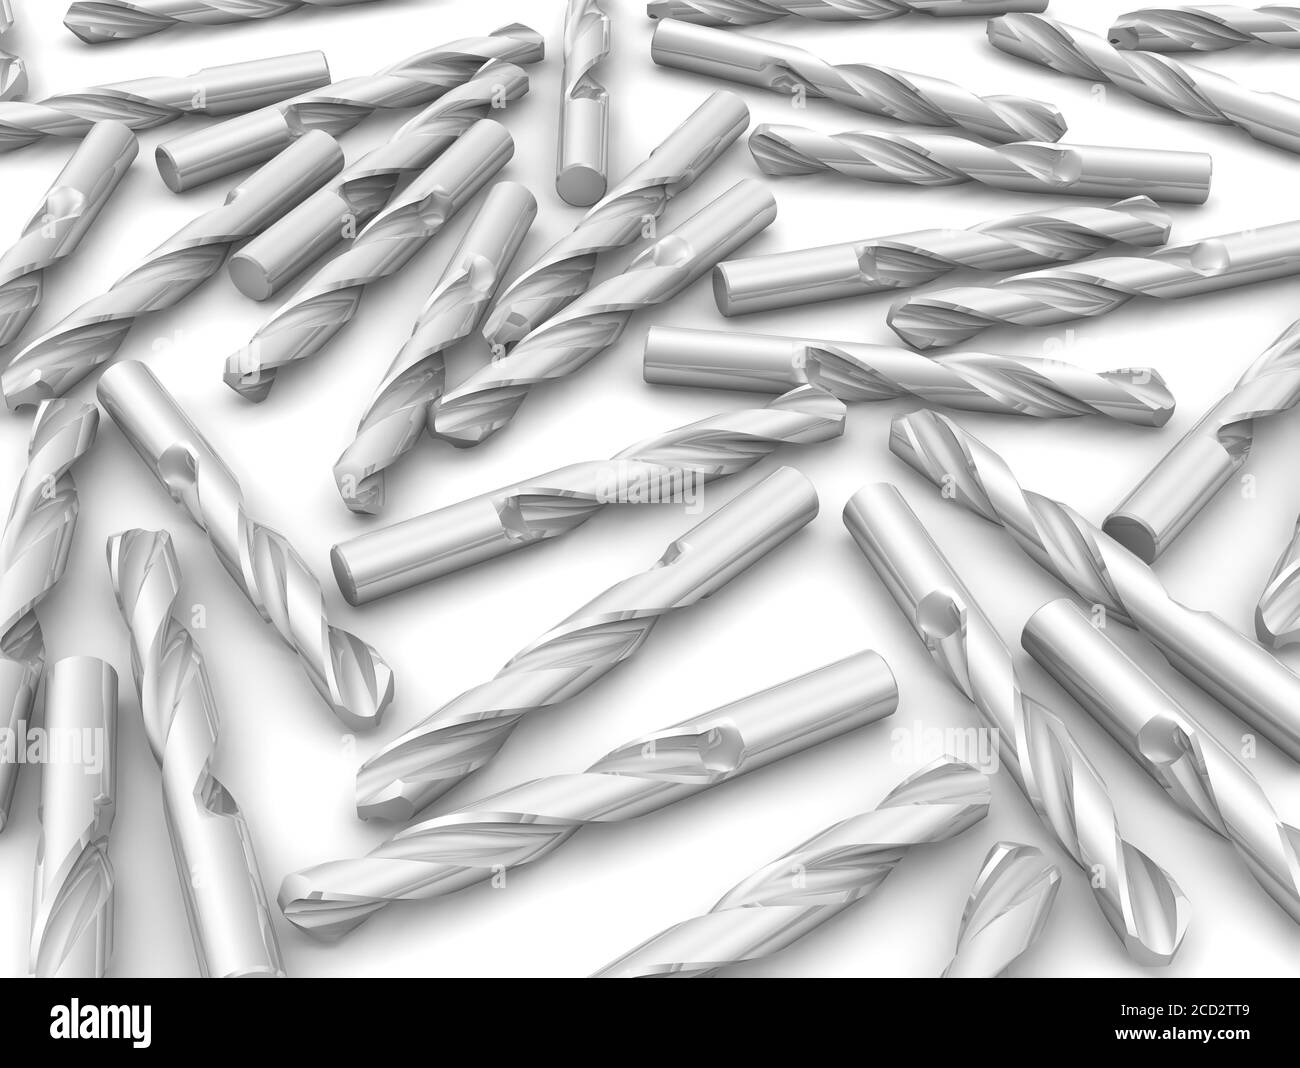 Spiral drills on a white surface. Many spiral drills lie randomly on a white surface. 3D Illustration Stock Photo